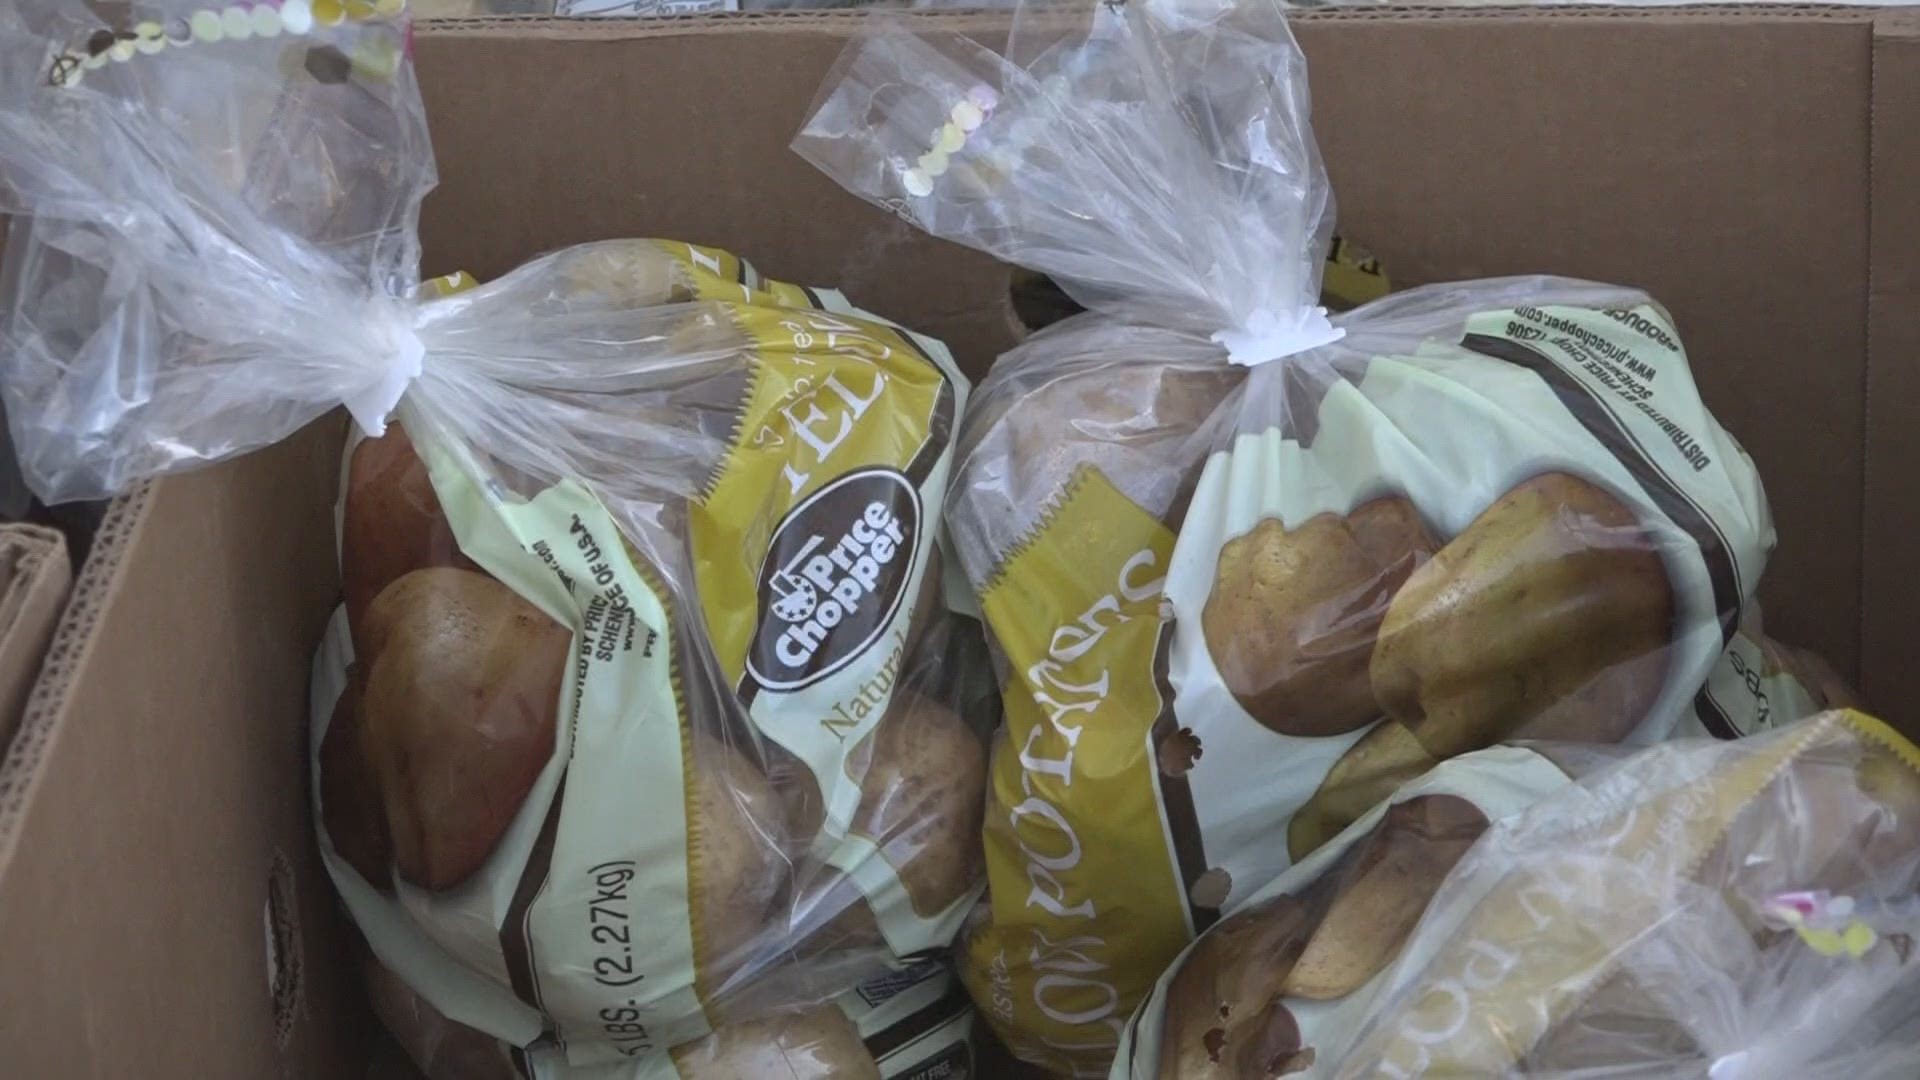 Food pantries are willing to help, but say people need to ask.